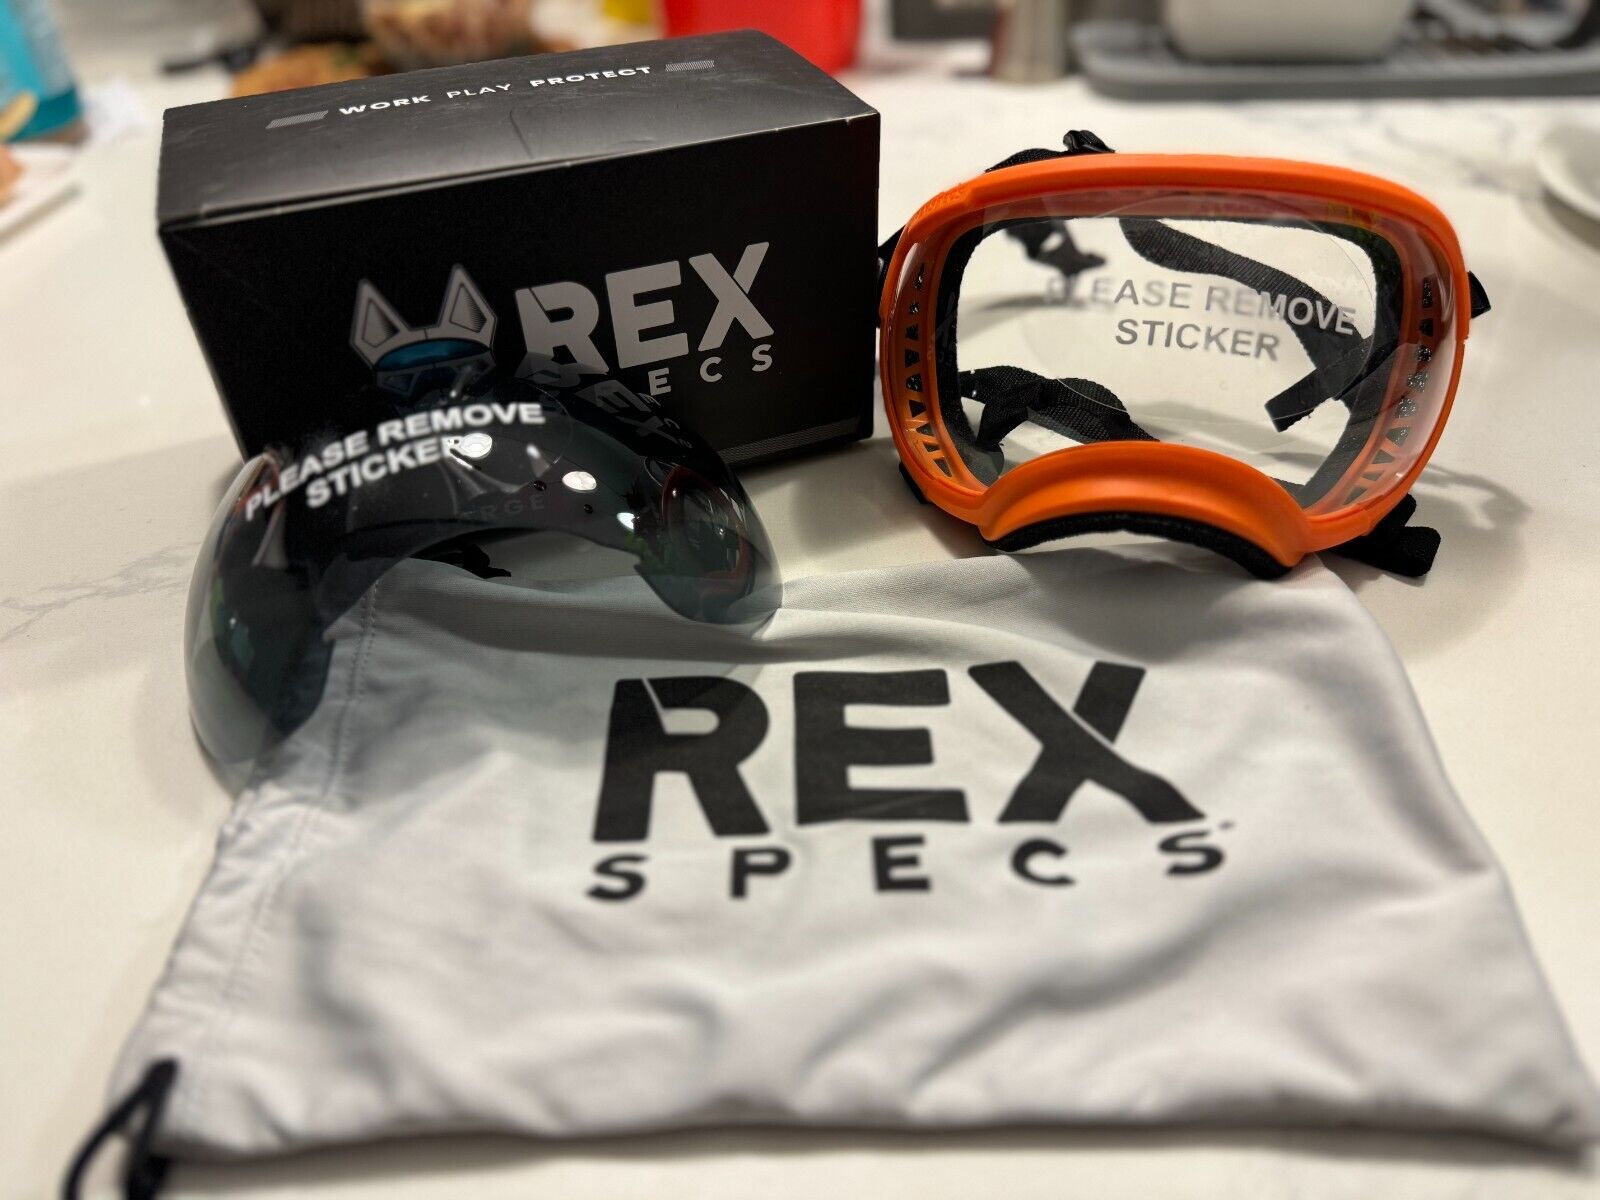 Rex Specs V2 Dog Goggles Orange Large with Two Lenses (LIKE NEW)